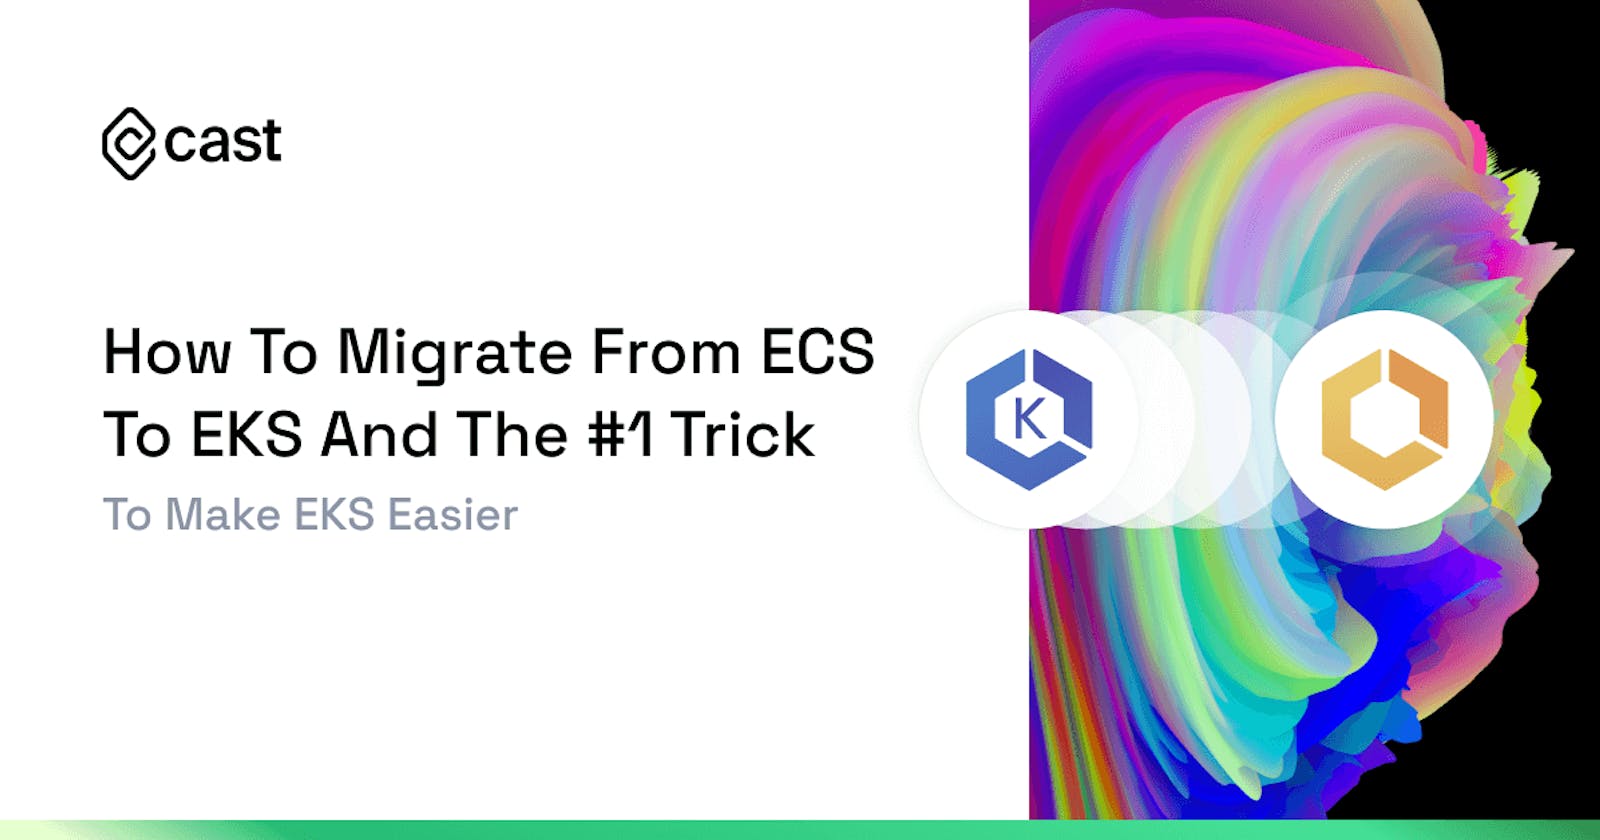 How to Migrate From ECS to EKS and the #1 Trick to Make EKS Easier